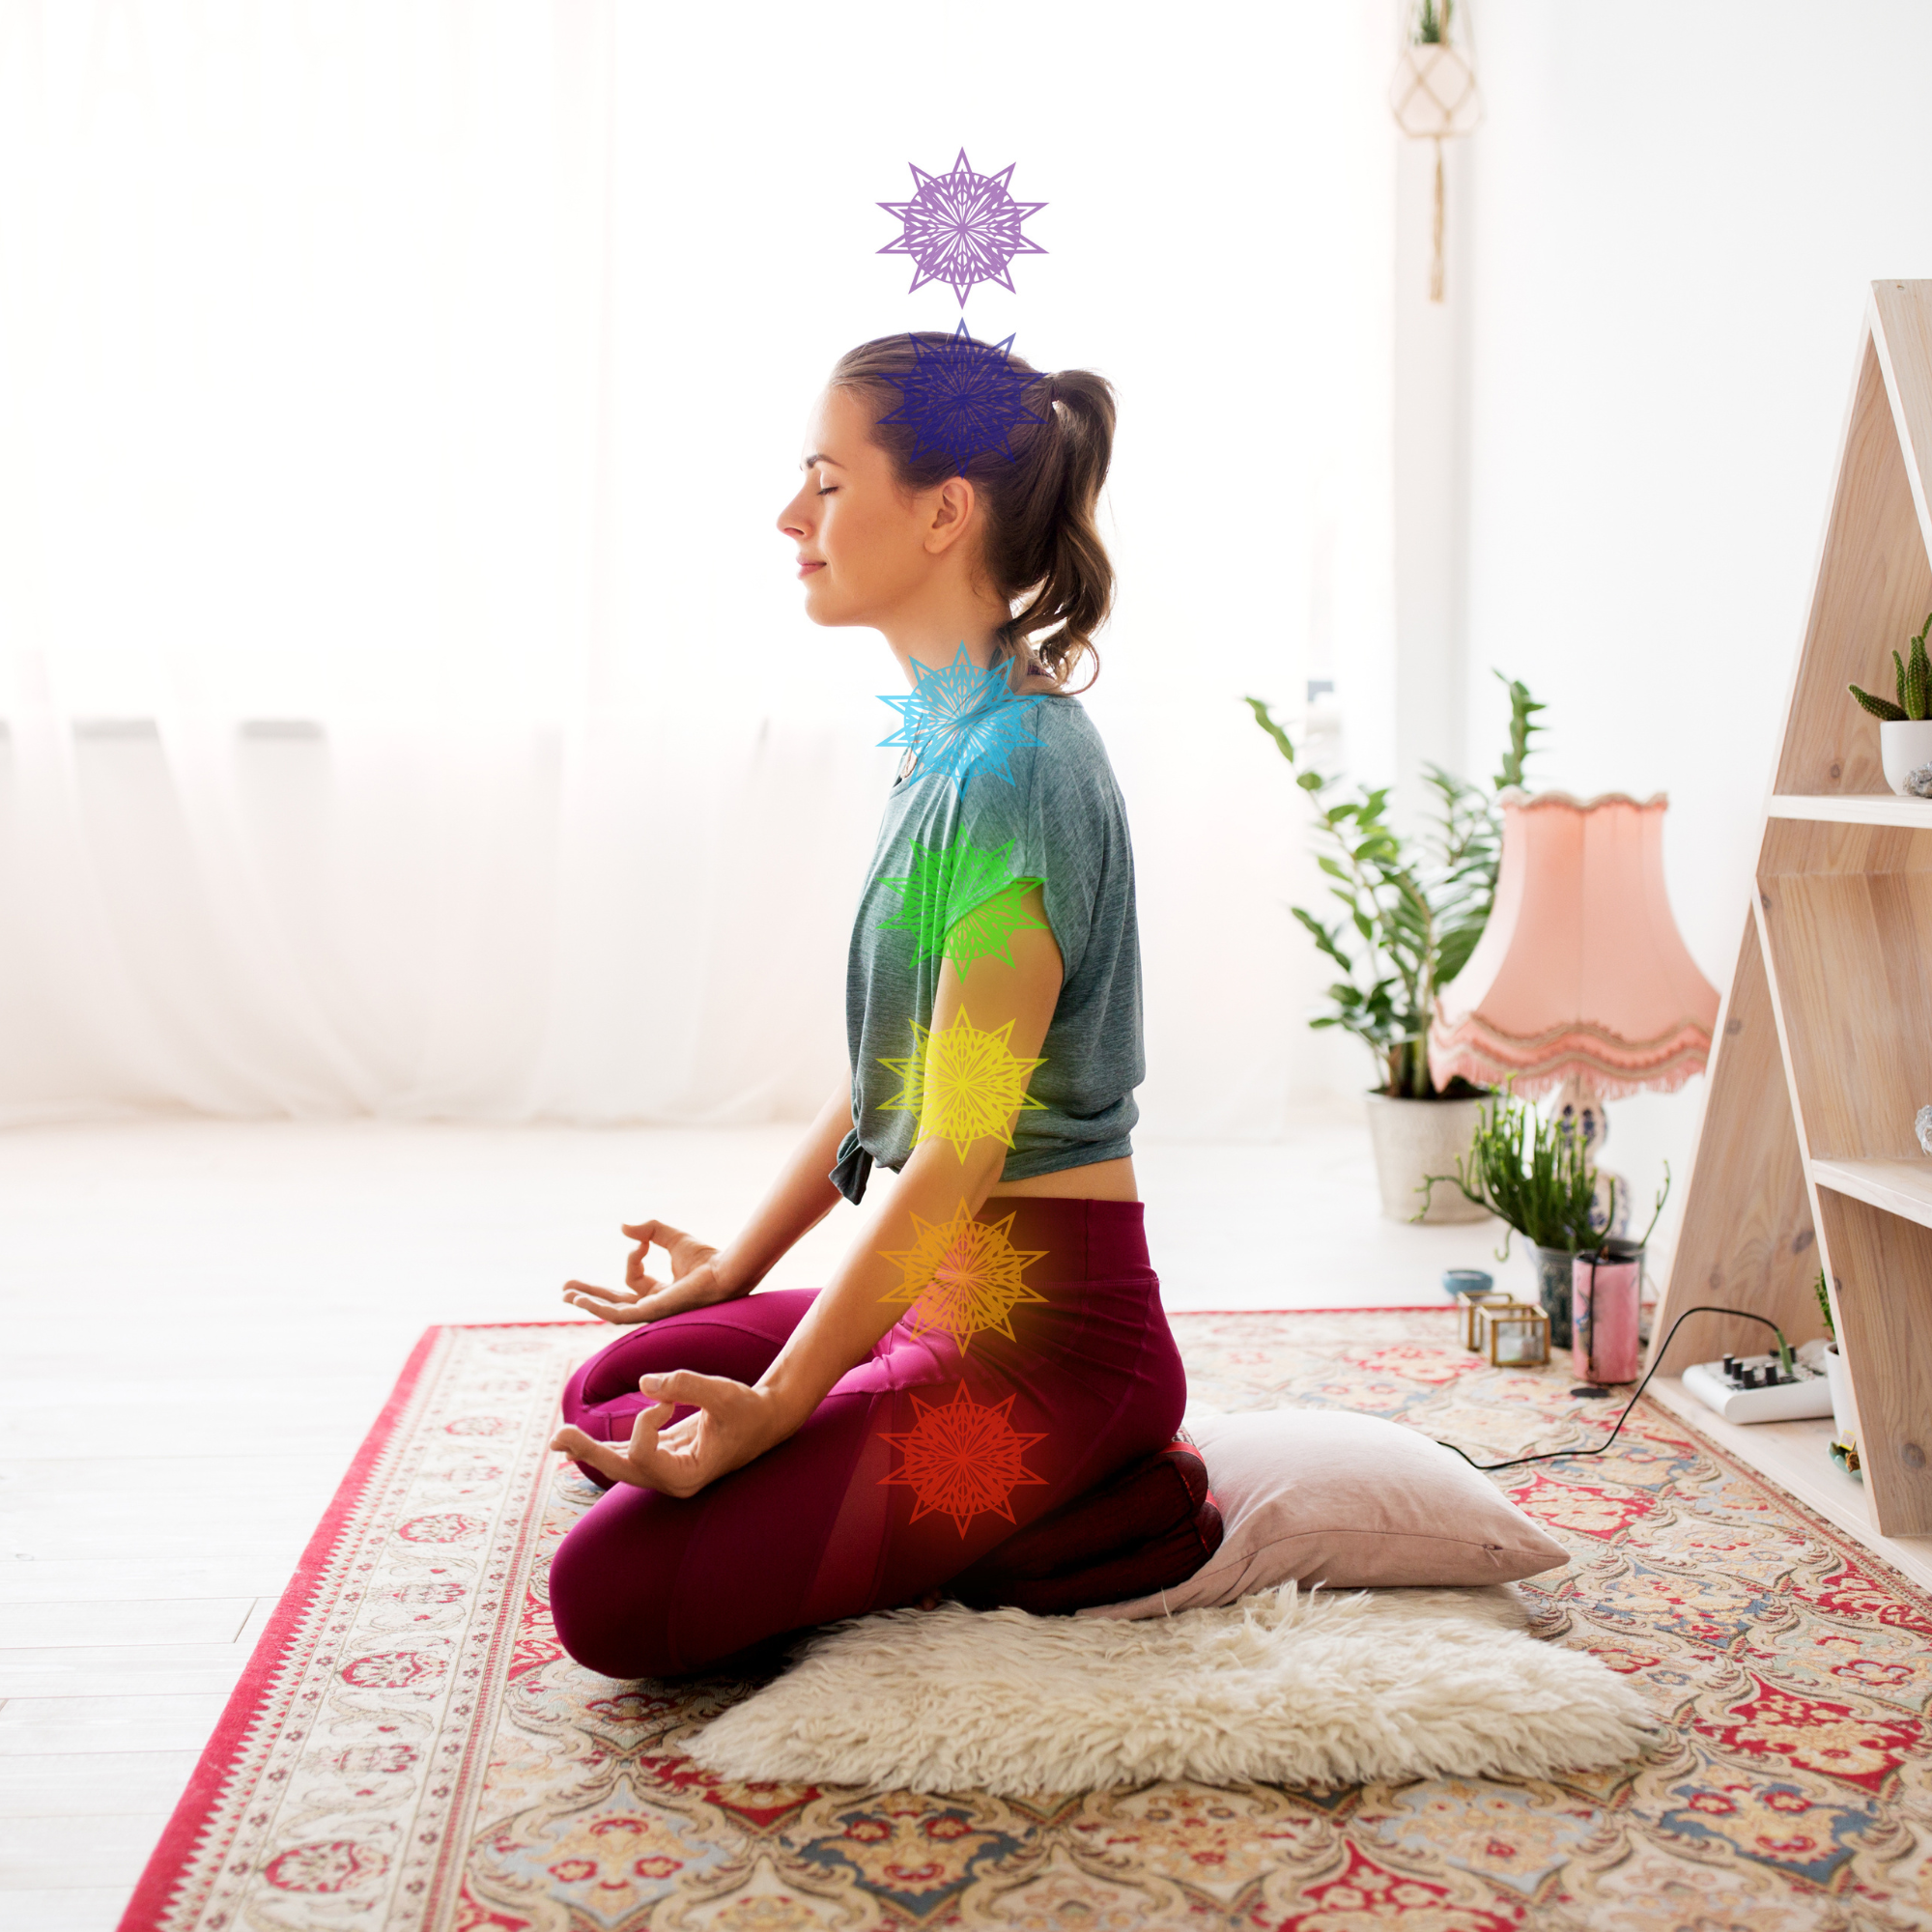 A women meditating with colorful chakra symbols over her body